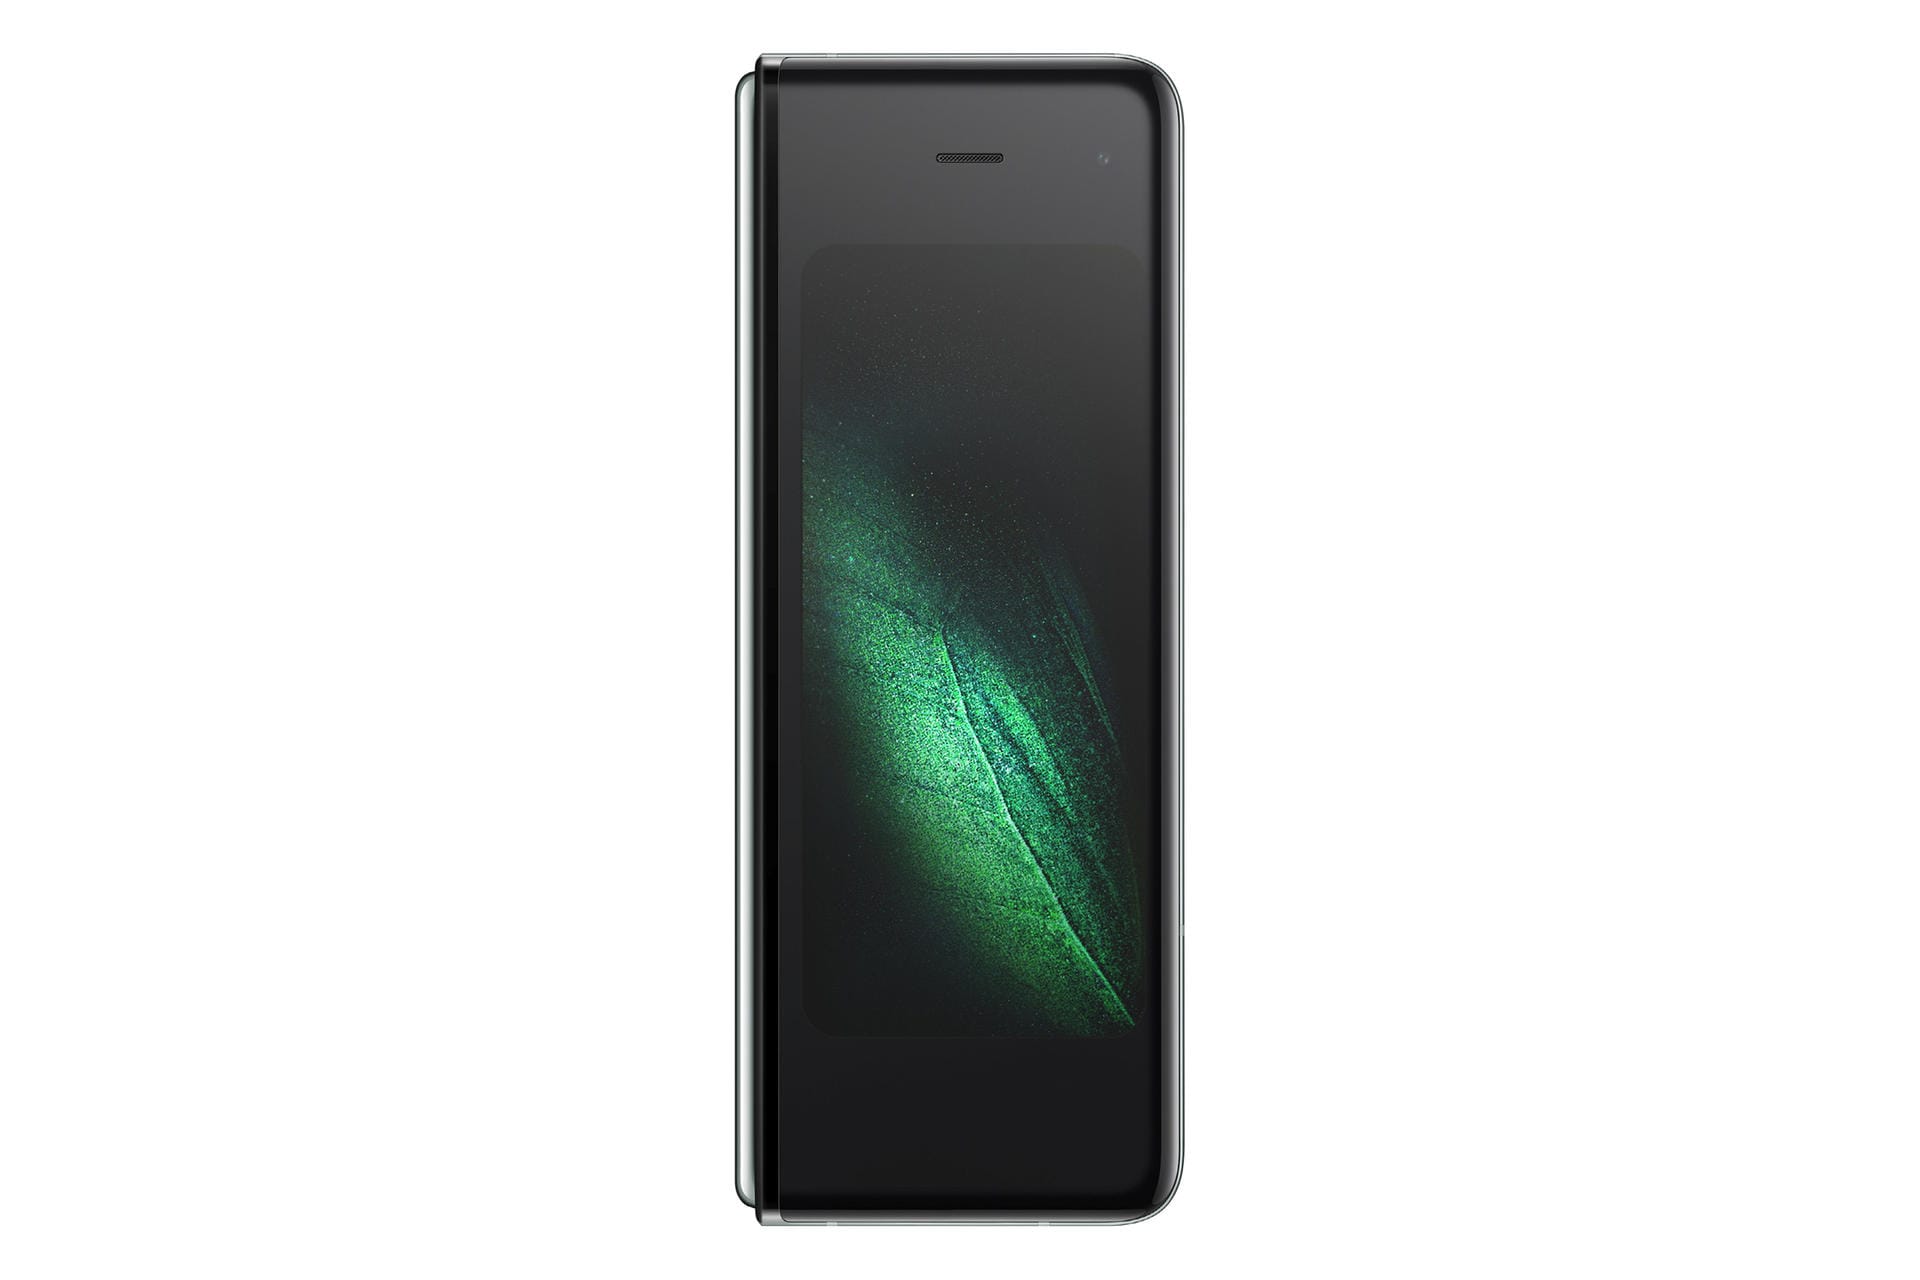 Samsung's new Galaxy Fold smarSamsung Galaxy Fold zusammengeklappt.t phone which features the world's first 7.3-inch Infinity Flex Display that works with the next-generation 5G networks